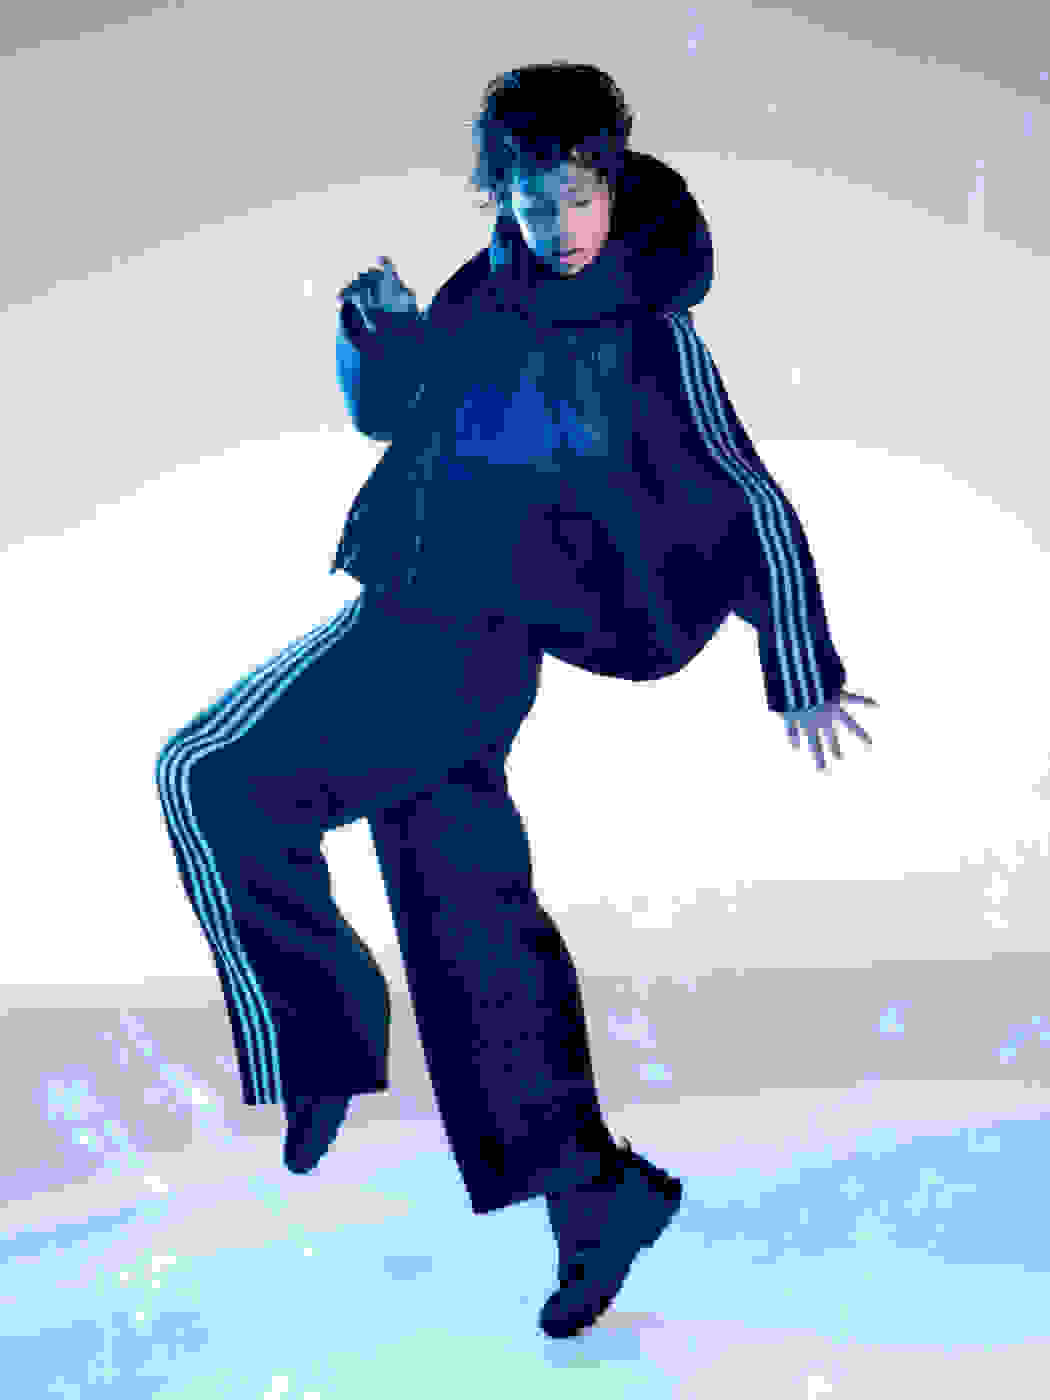 A woman wearing a black 3-striped adidas Y-3 jacket and matching pants jumps high with one leg up while rain falls around her.